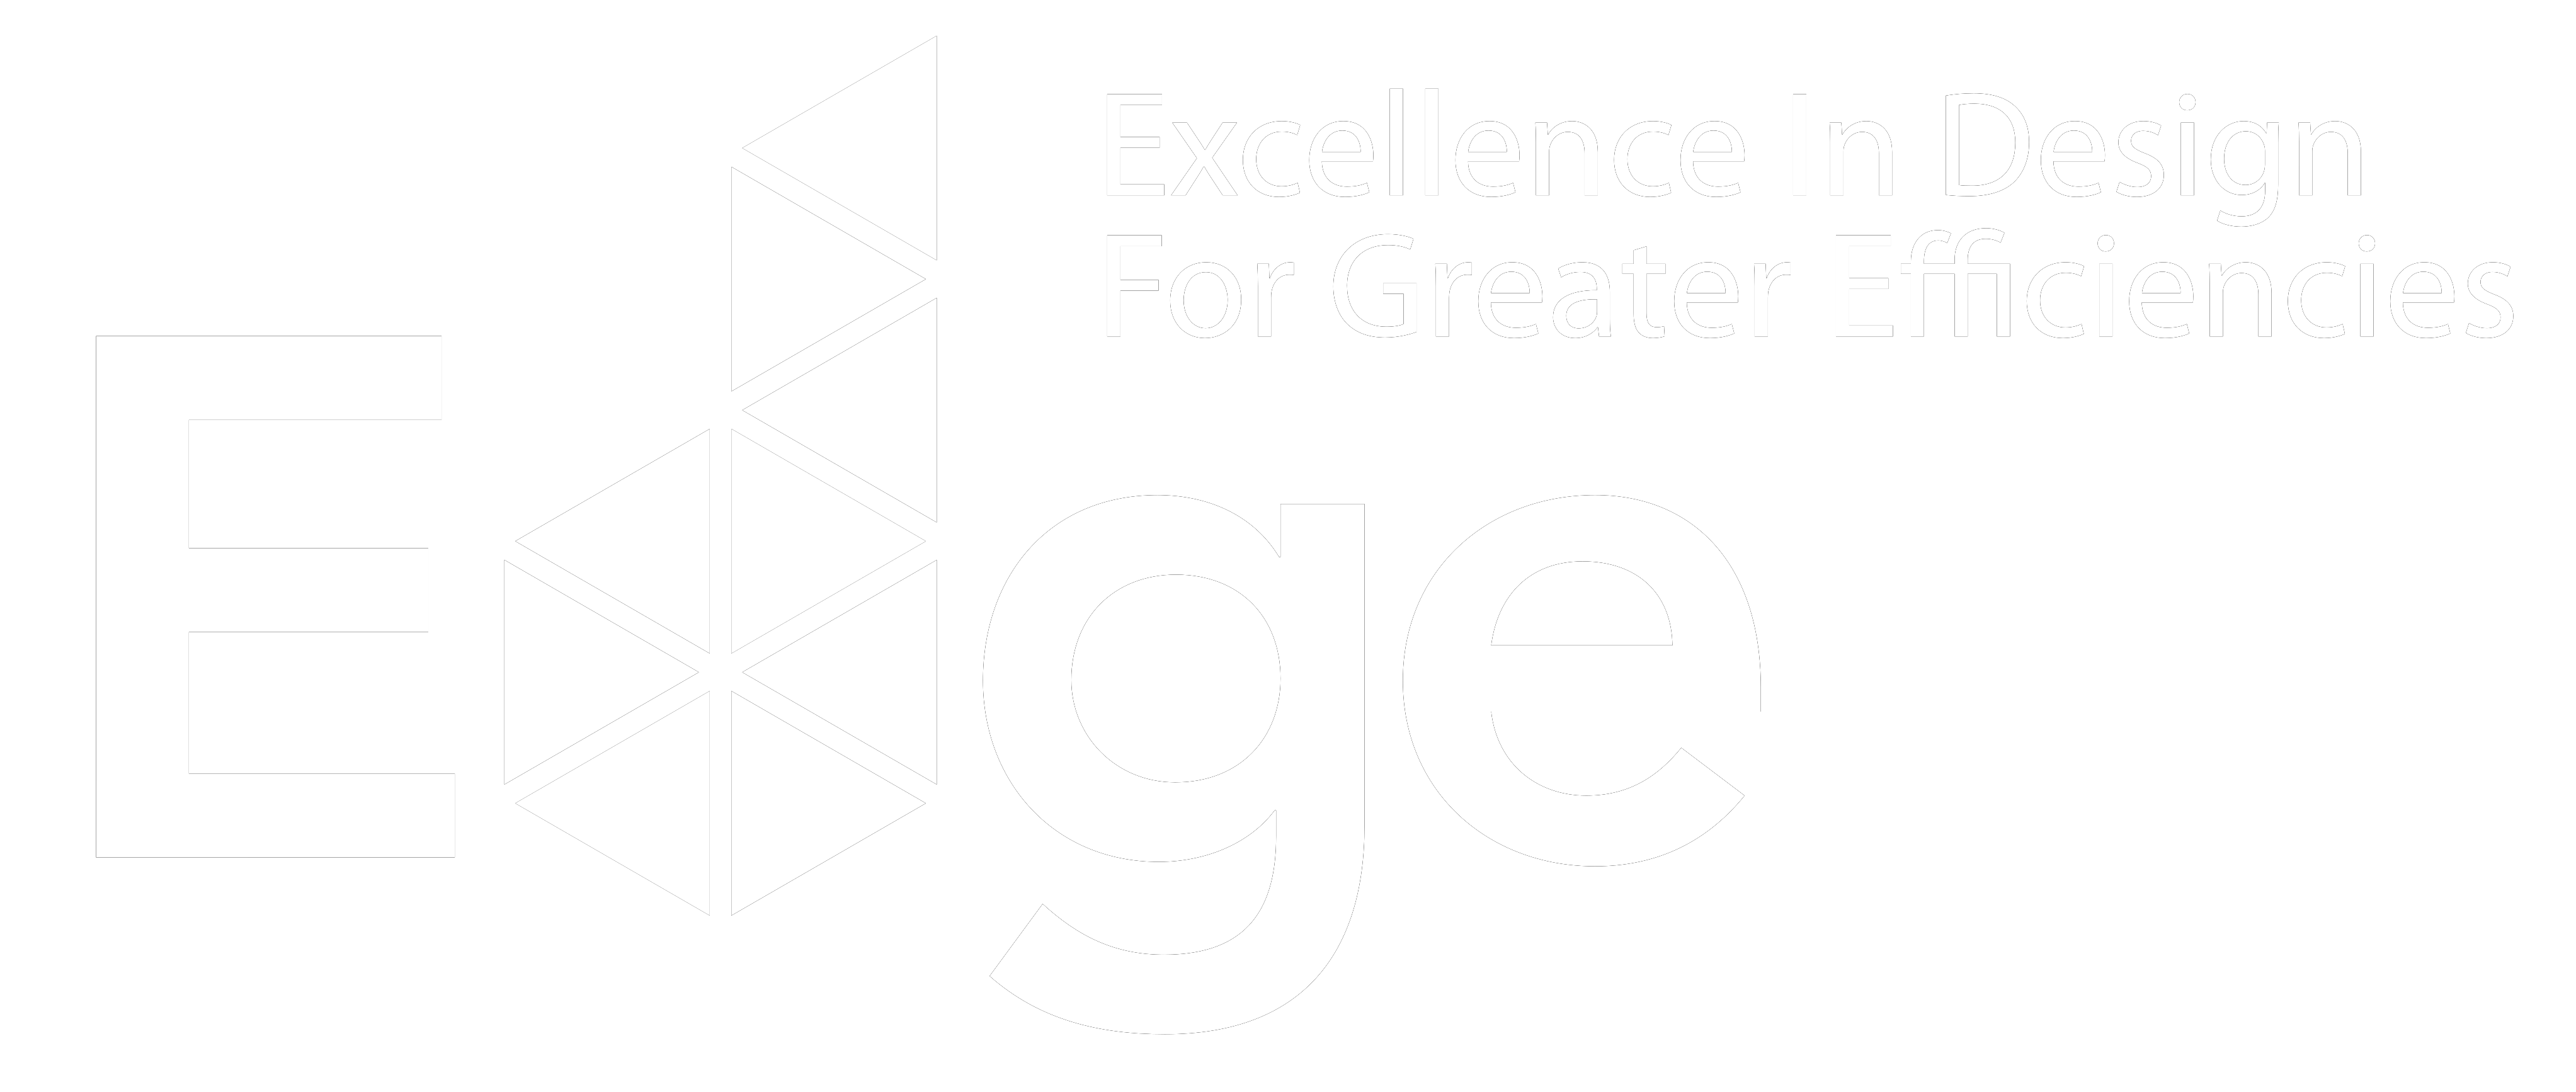 Excellence in Design for Greater Efficiencies